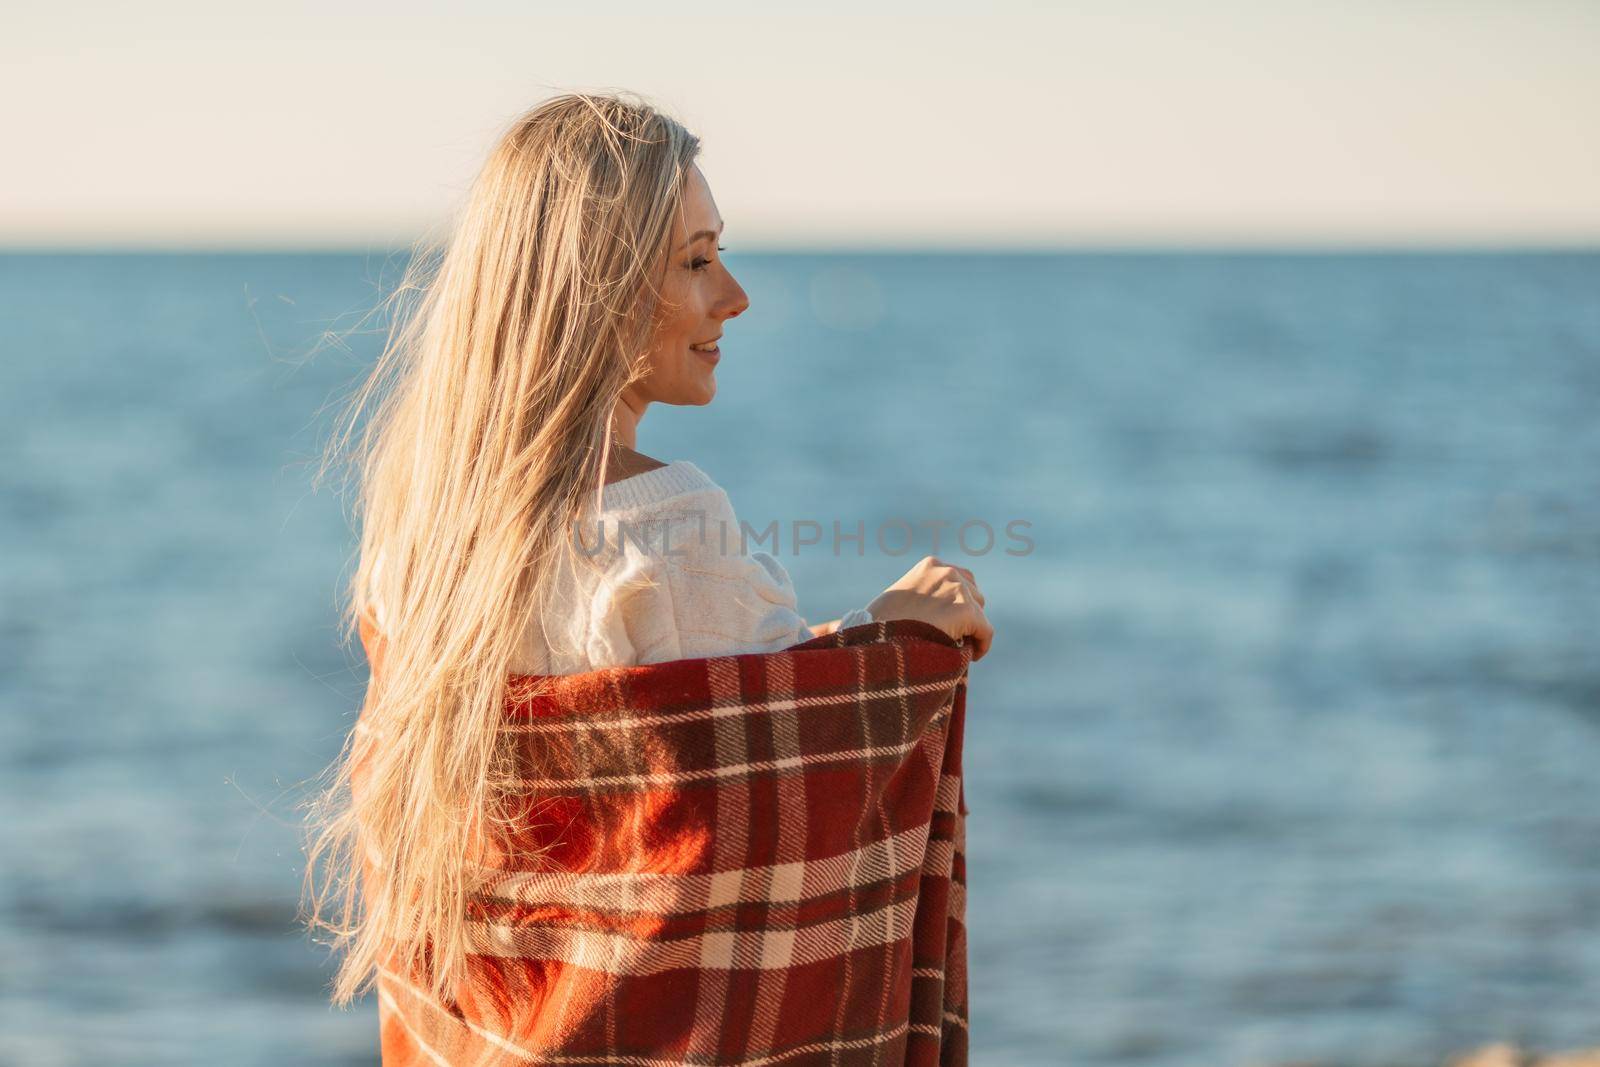 Attractive blonde Caucasian woman enjoying time on the beach at sunset, walking in a blanket and looking to the side, with the sunset sky and sea in the background. Beach vacation by Matiunina